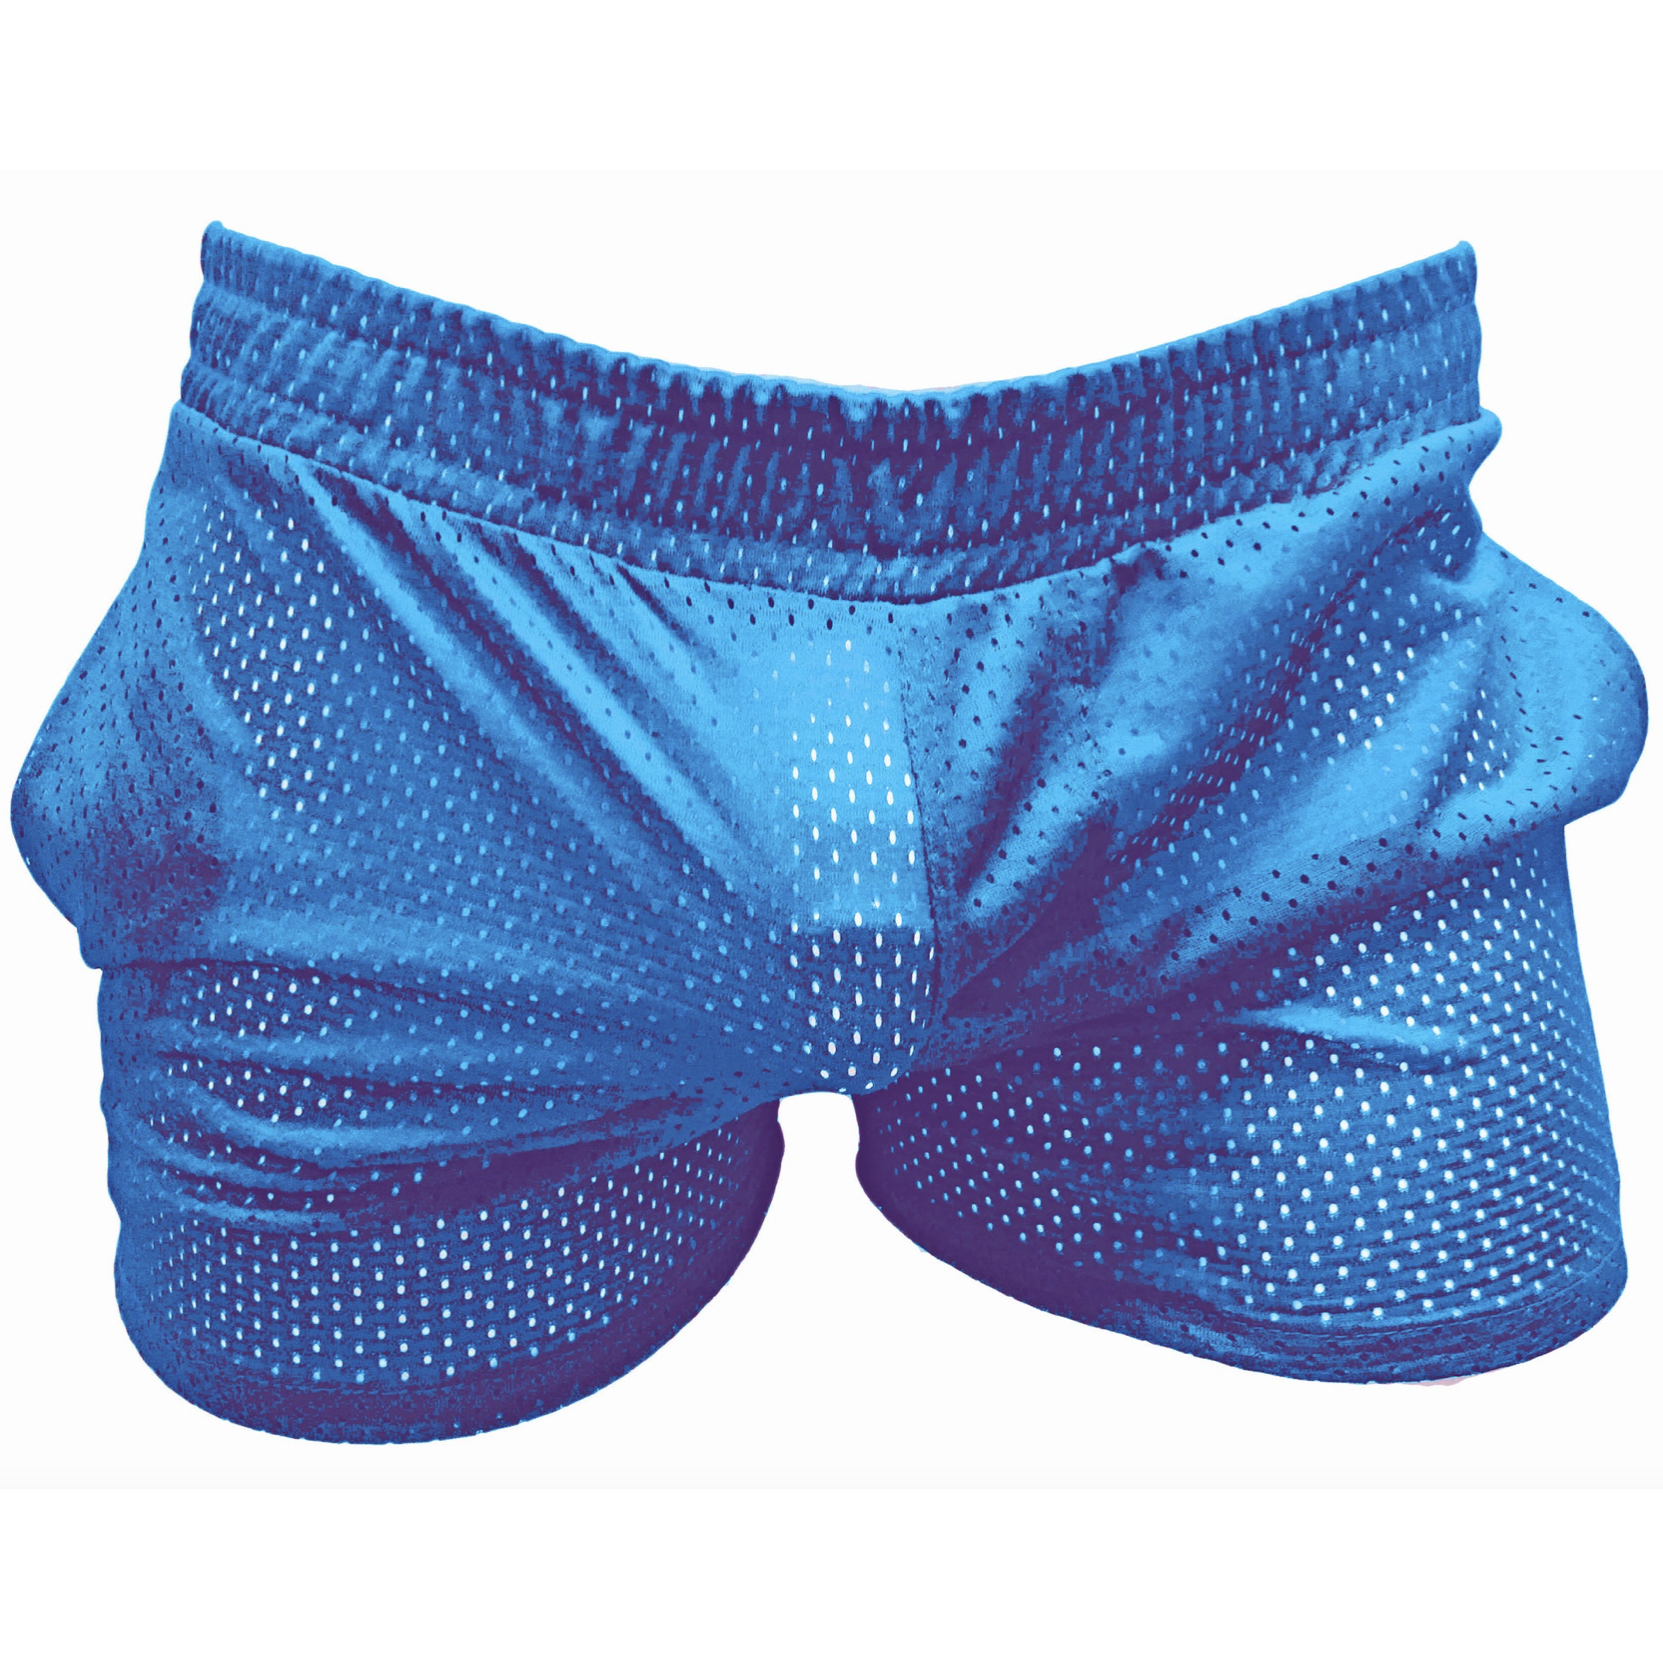 Knobs Mesh Booty Shorts - Electric Blue